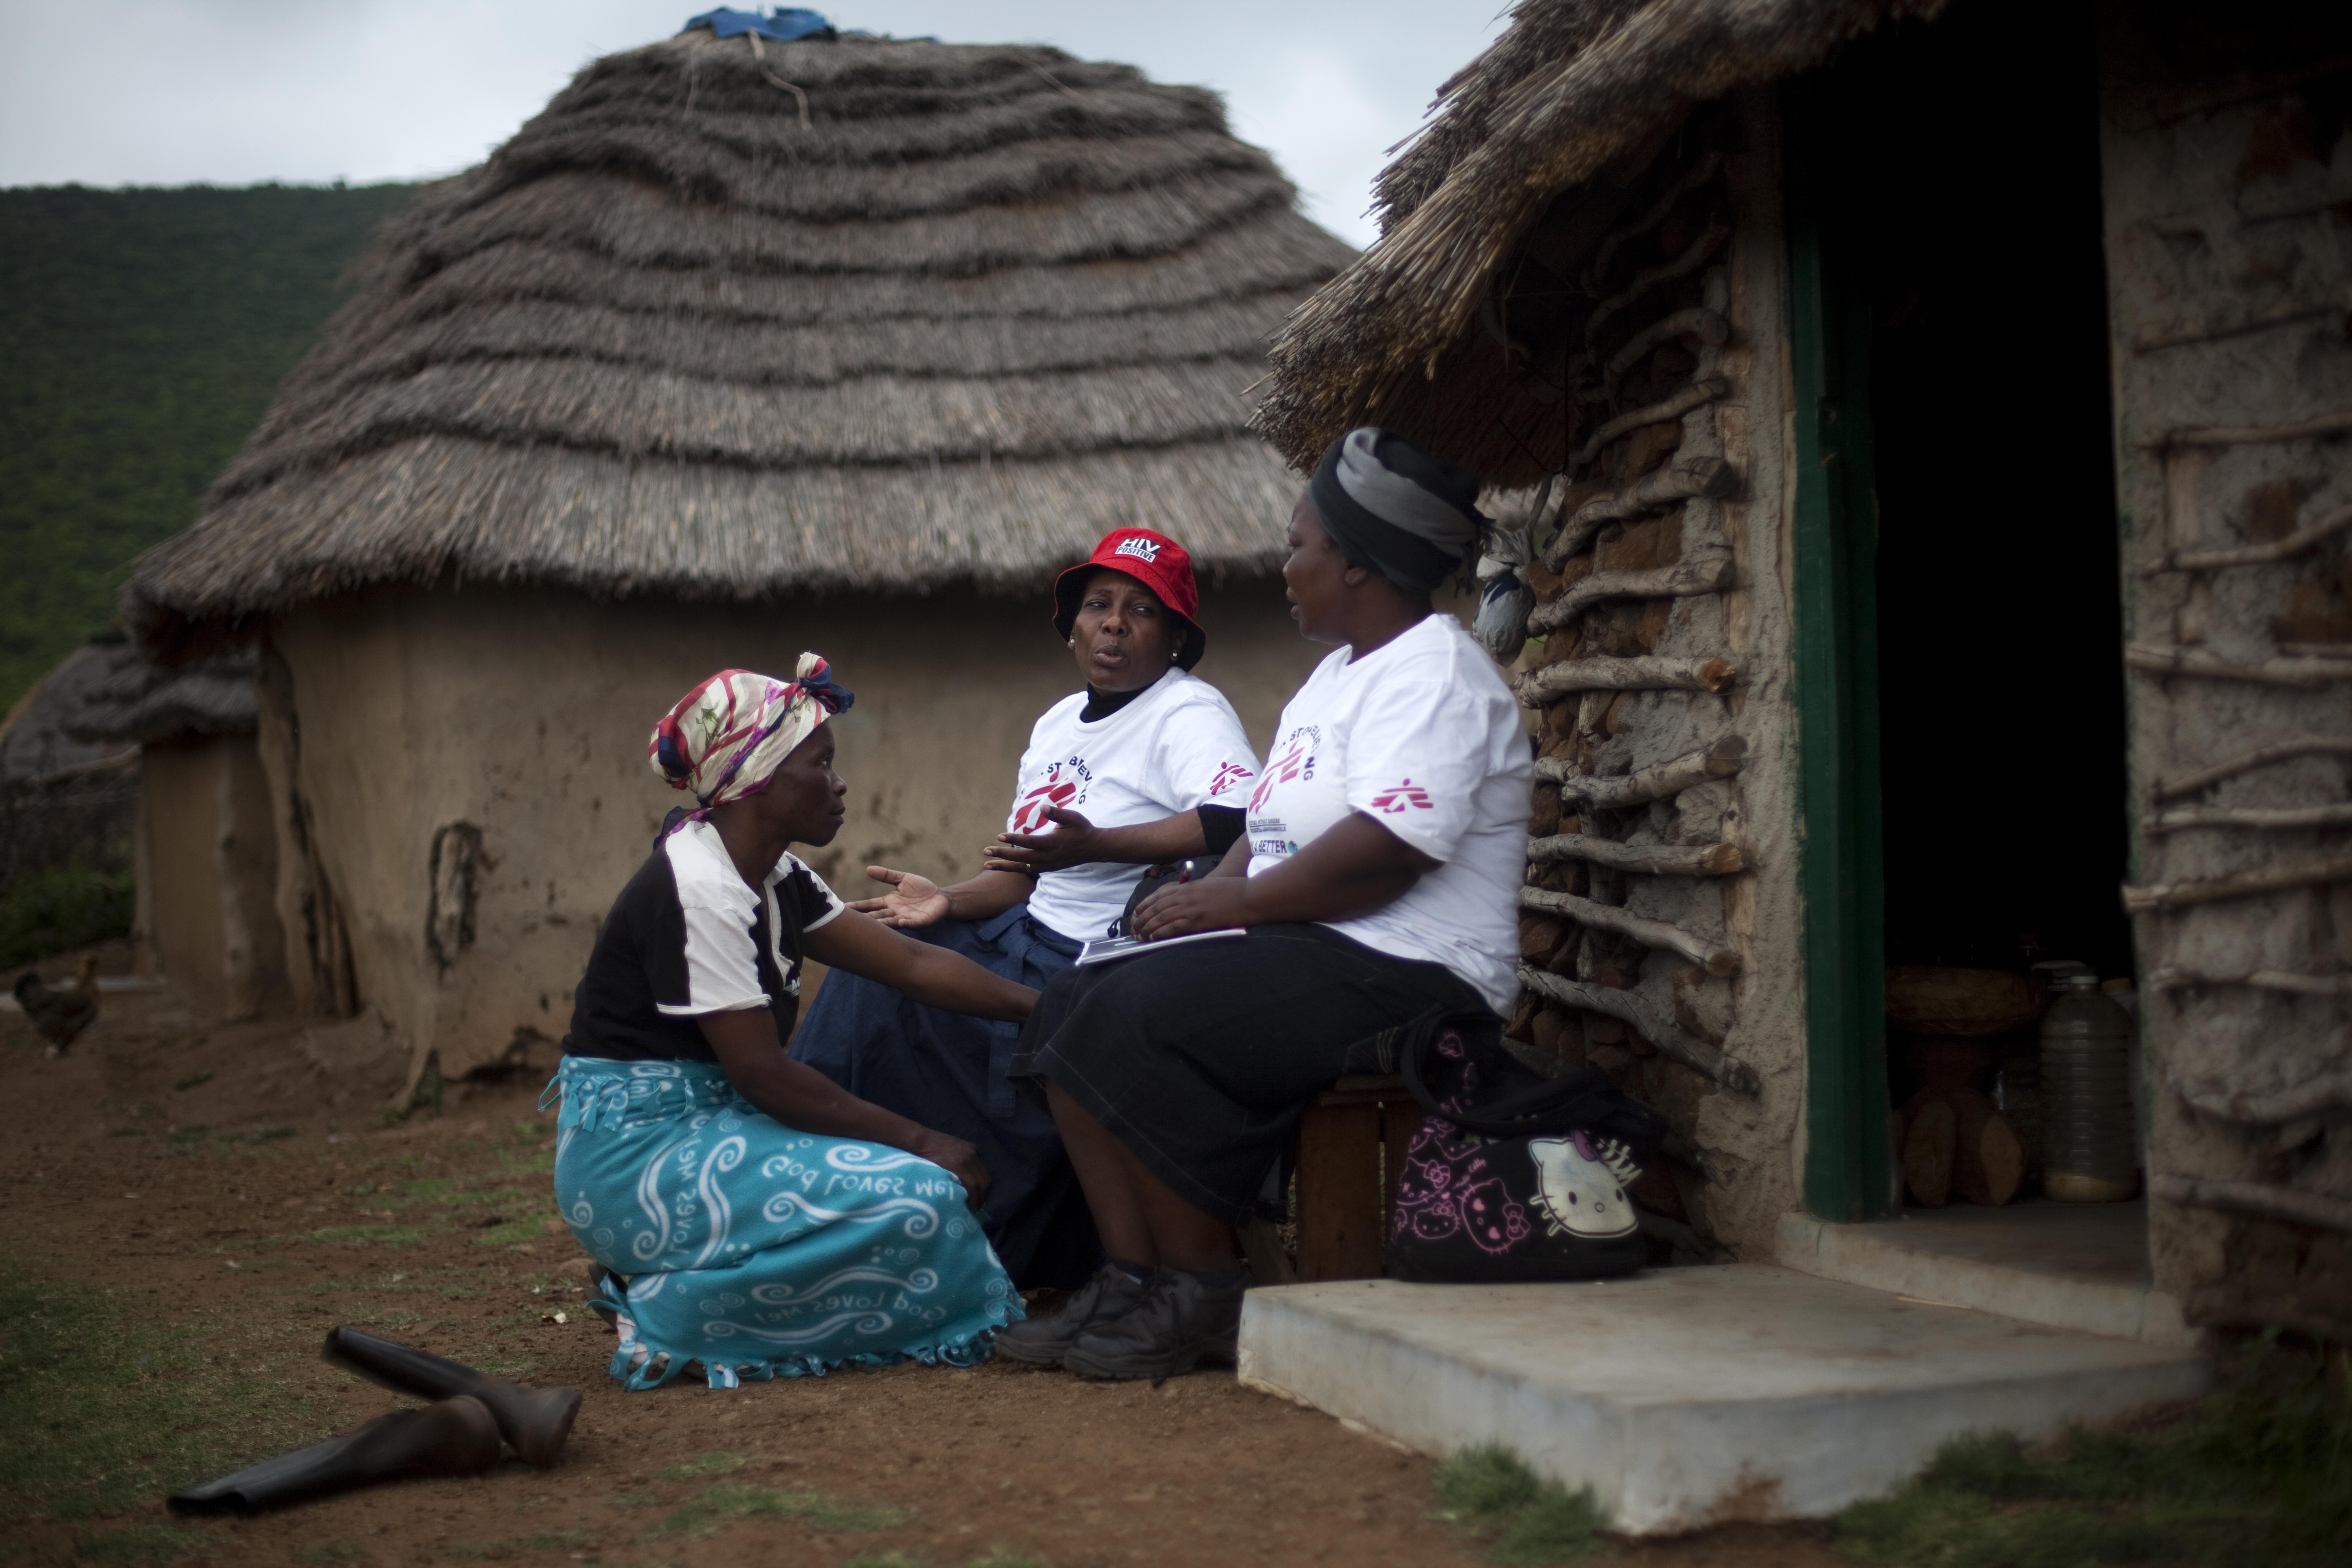 MSF Patient Support Education and Counselling (PSEC) Community Supervisor, Sylvia Khuzwayo with Community Expert Client, Busi Gumbi and HIV patient.